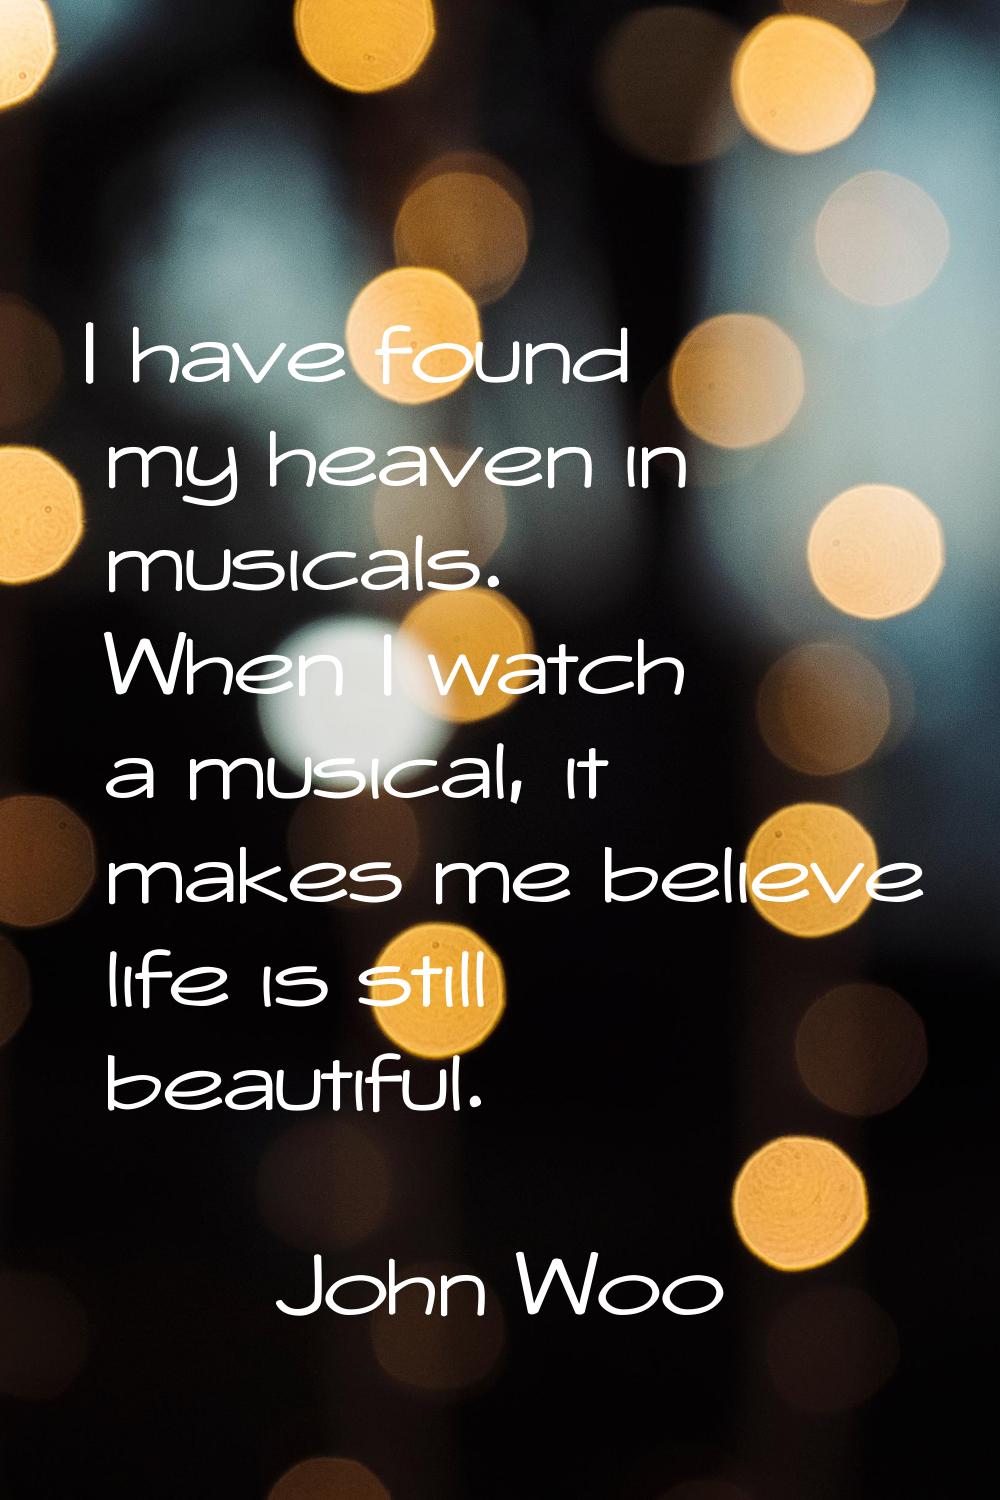 I have found my heaven in musicals. When I watch a musical, it makes me believe life is still beaut